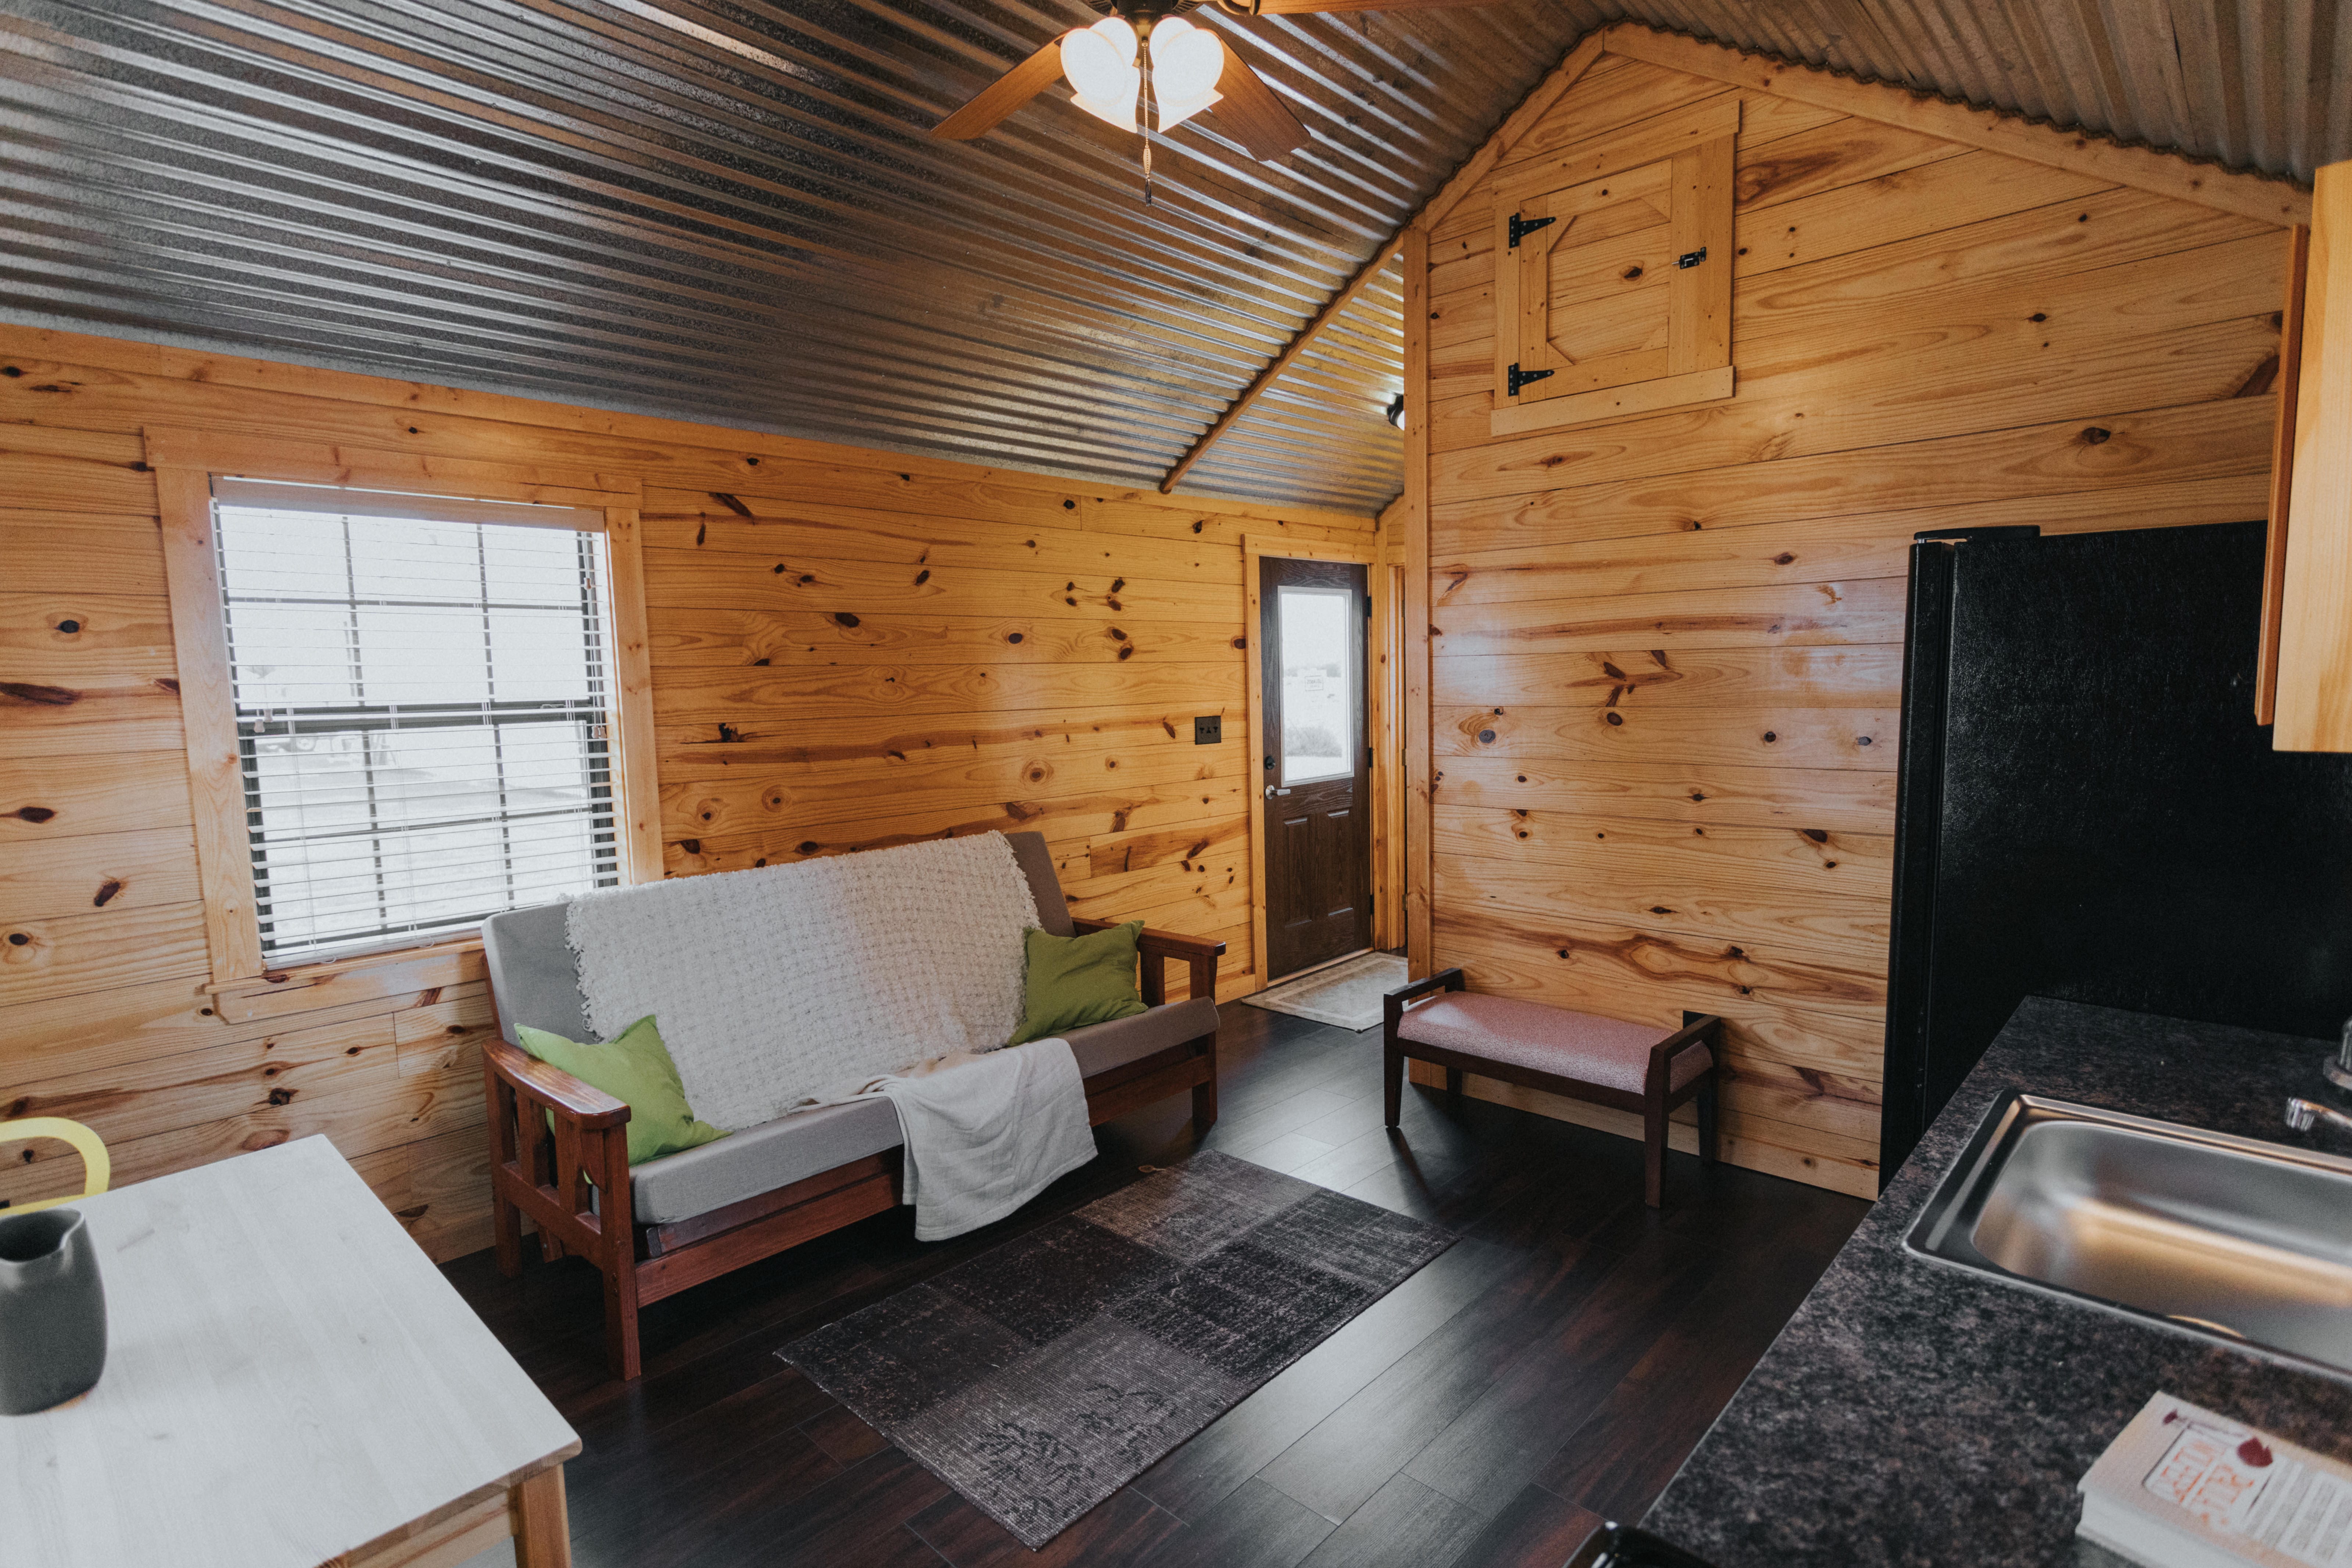 stag6 - Unlikely Benefits of Owning a Small-Size Cabin